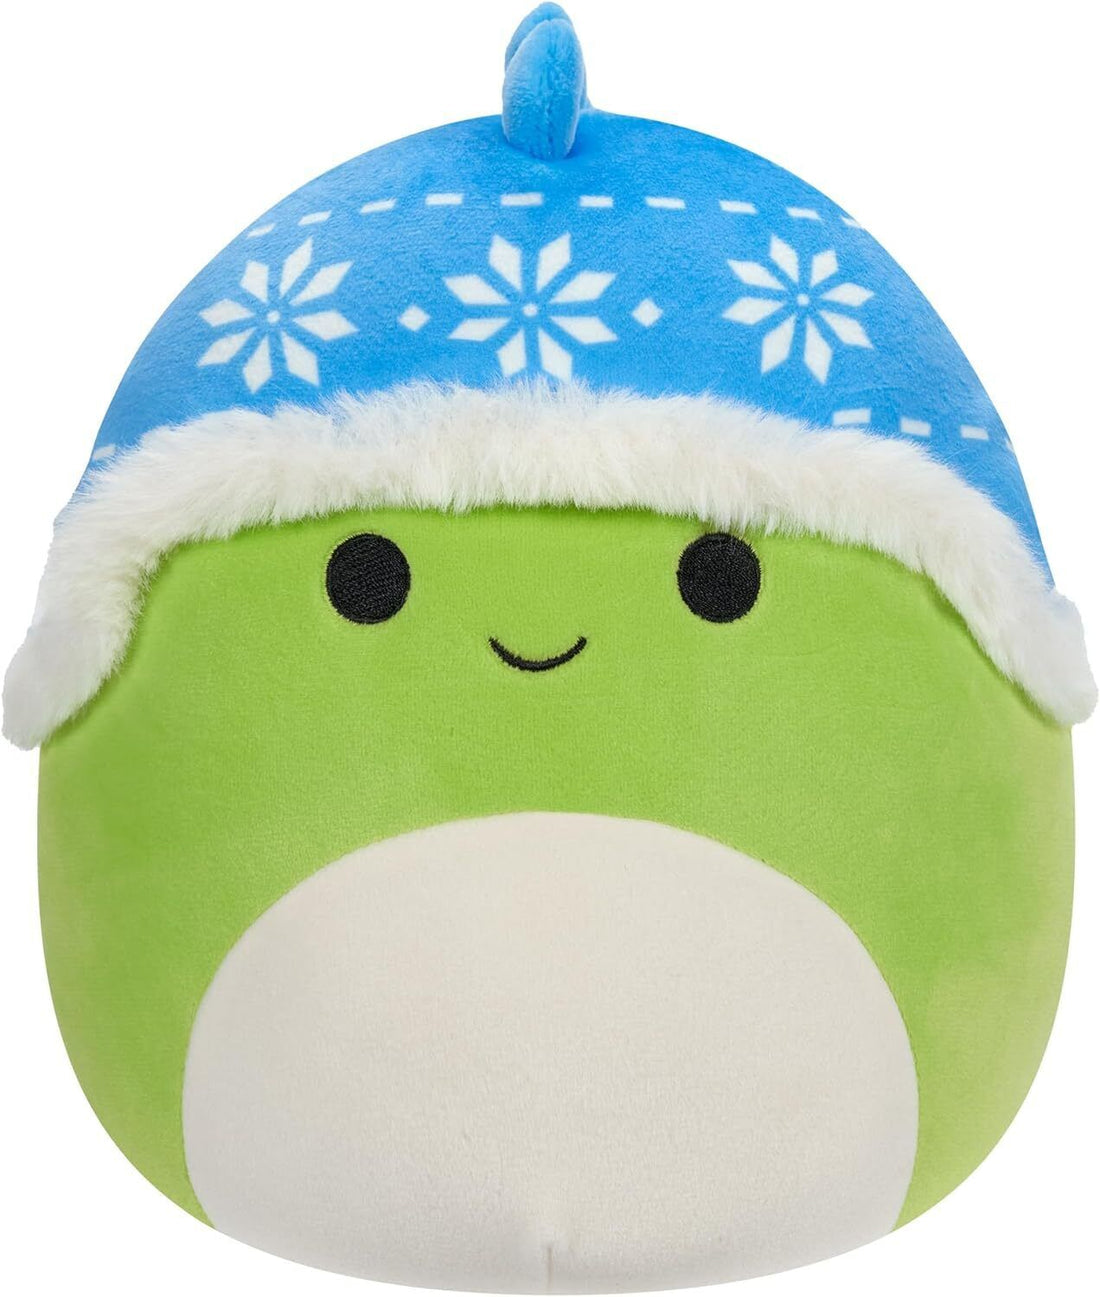 Squishmallows christmas collection 7.5 inch soft cuddly toys - DANNY THE DINO WITH BLUE HAT